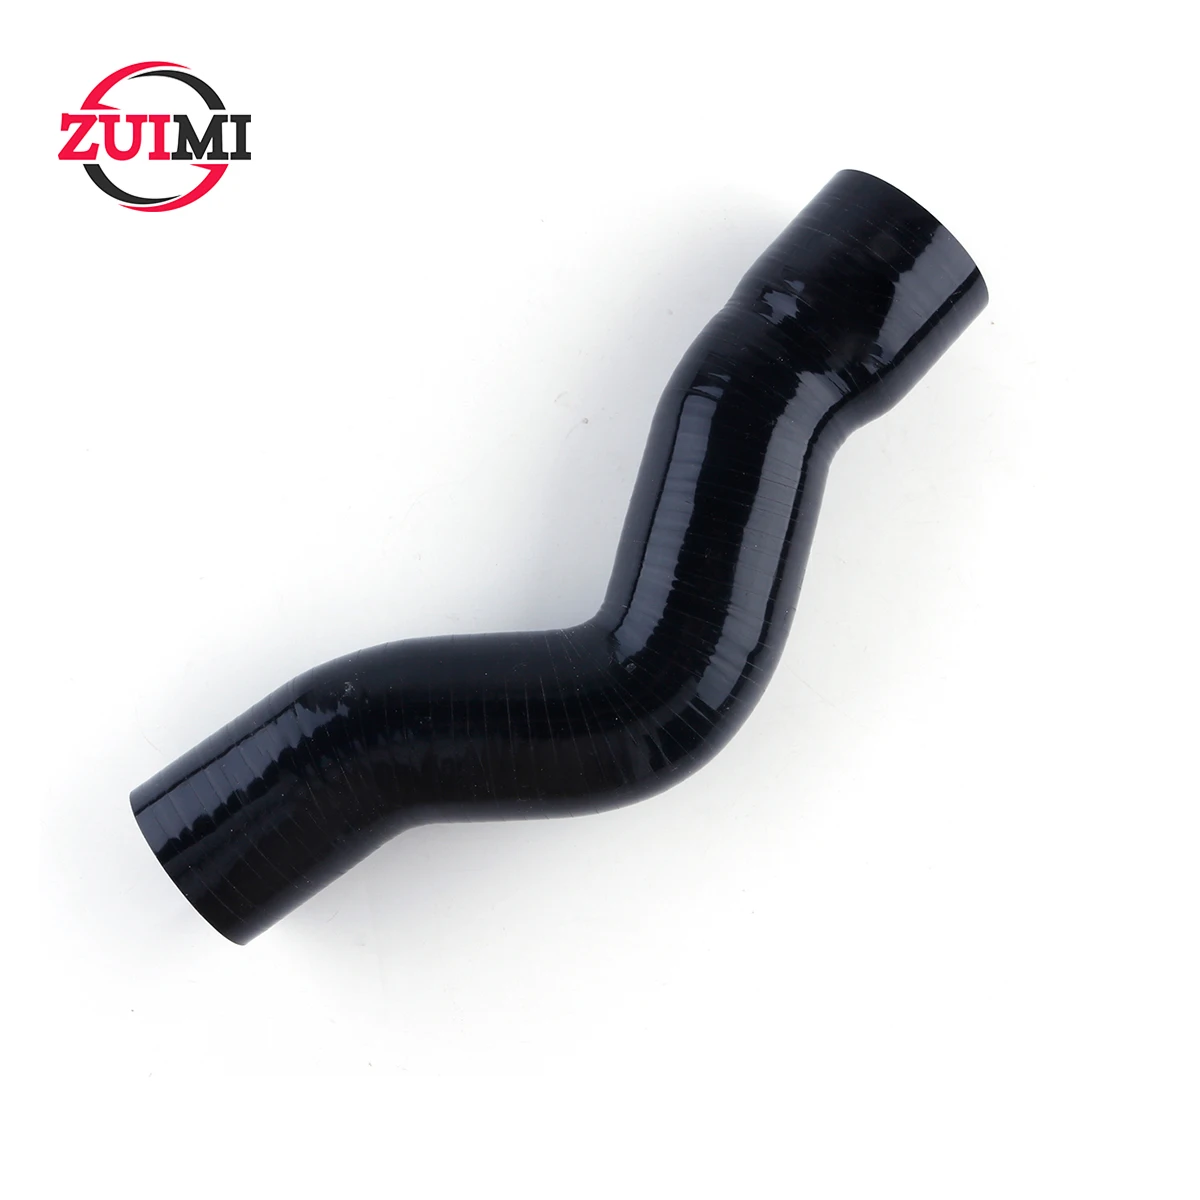 

For FORD S-MAX TDCi 2.2 INTERCOOLER EGR SILICONE HOSE TURBO BOOST PIPE Fits S-MAX 2.2L TDCi